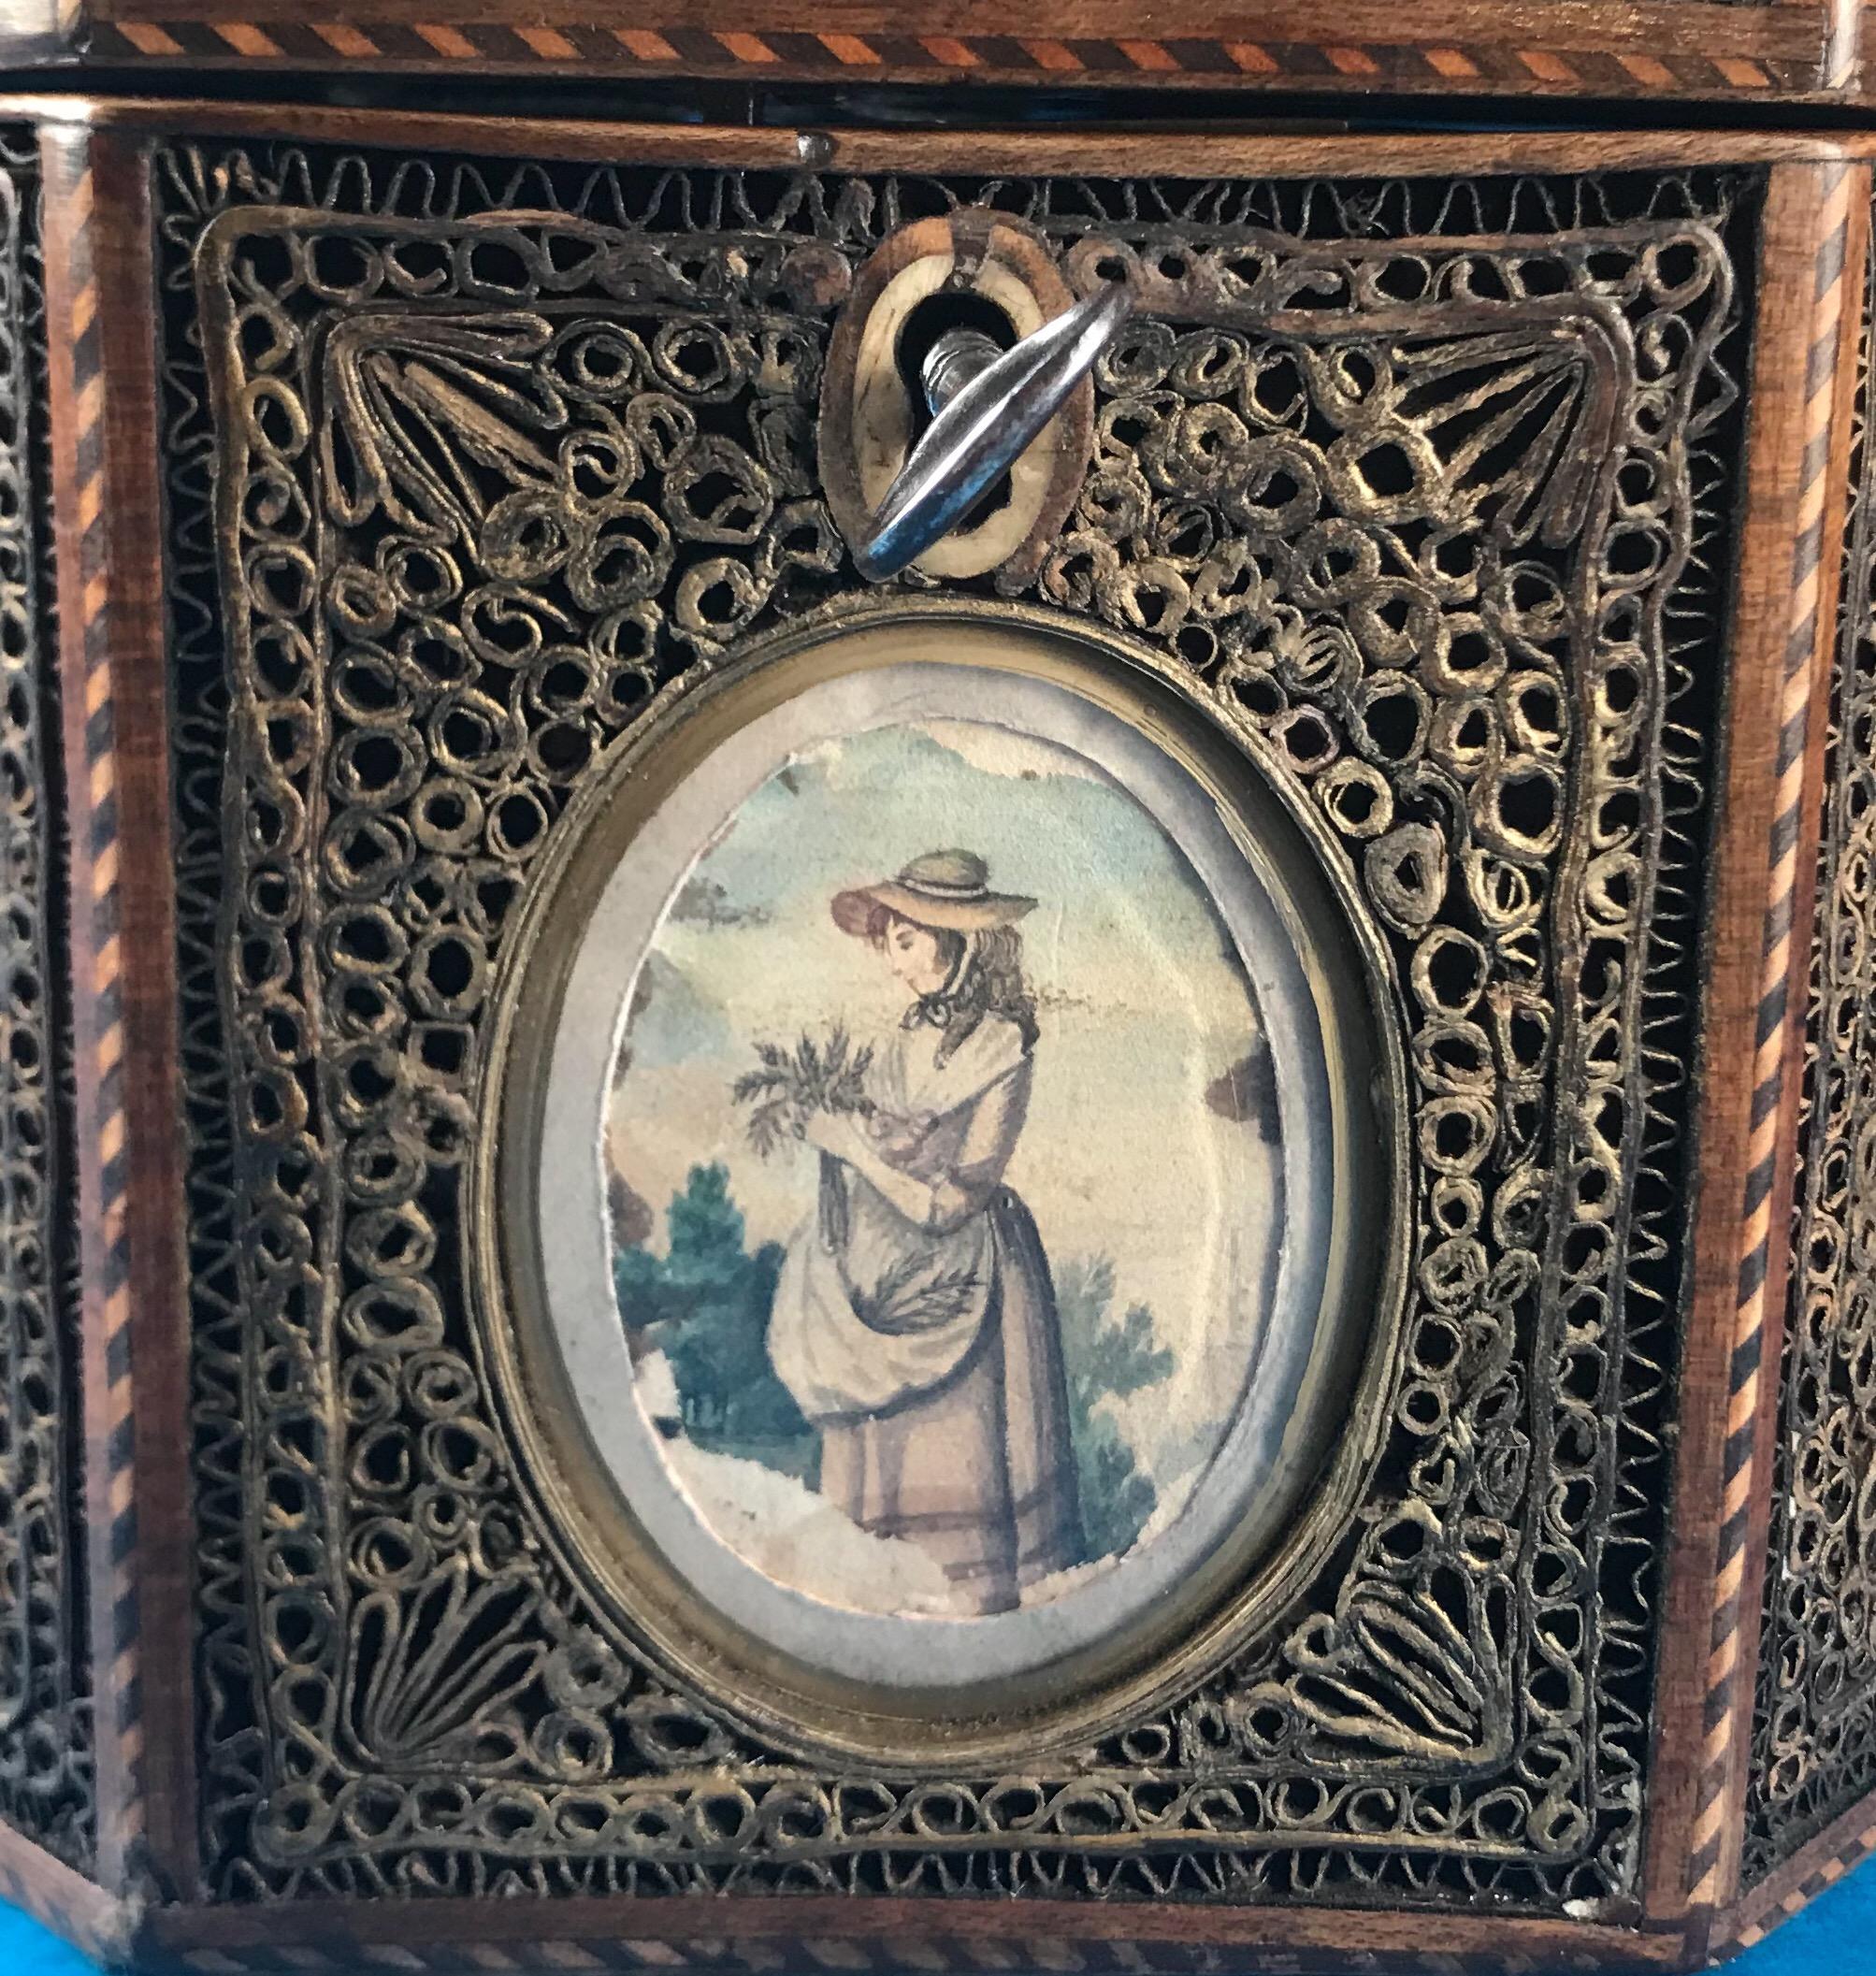 A rare 18th century 1785 rolled paper inlaid tea caddy in superb original condition, it’s boxwood and ebony inlaid around the edge of the box, it has a bevelled oval picture to the front of a girl holding a basket of flowers, on the other side it